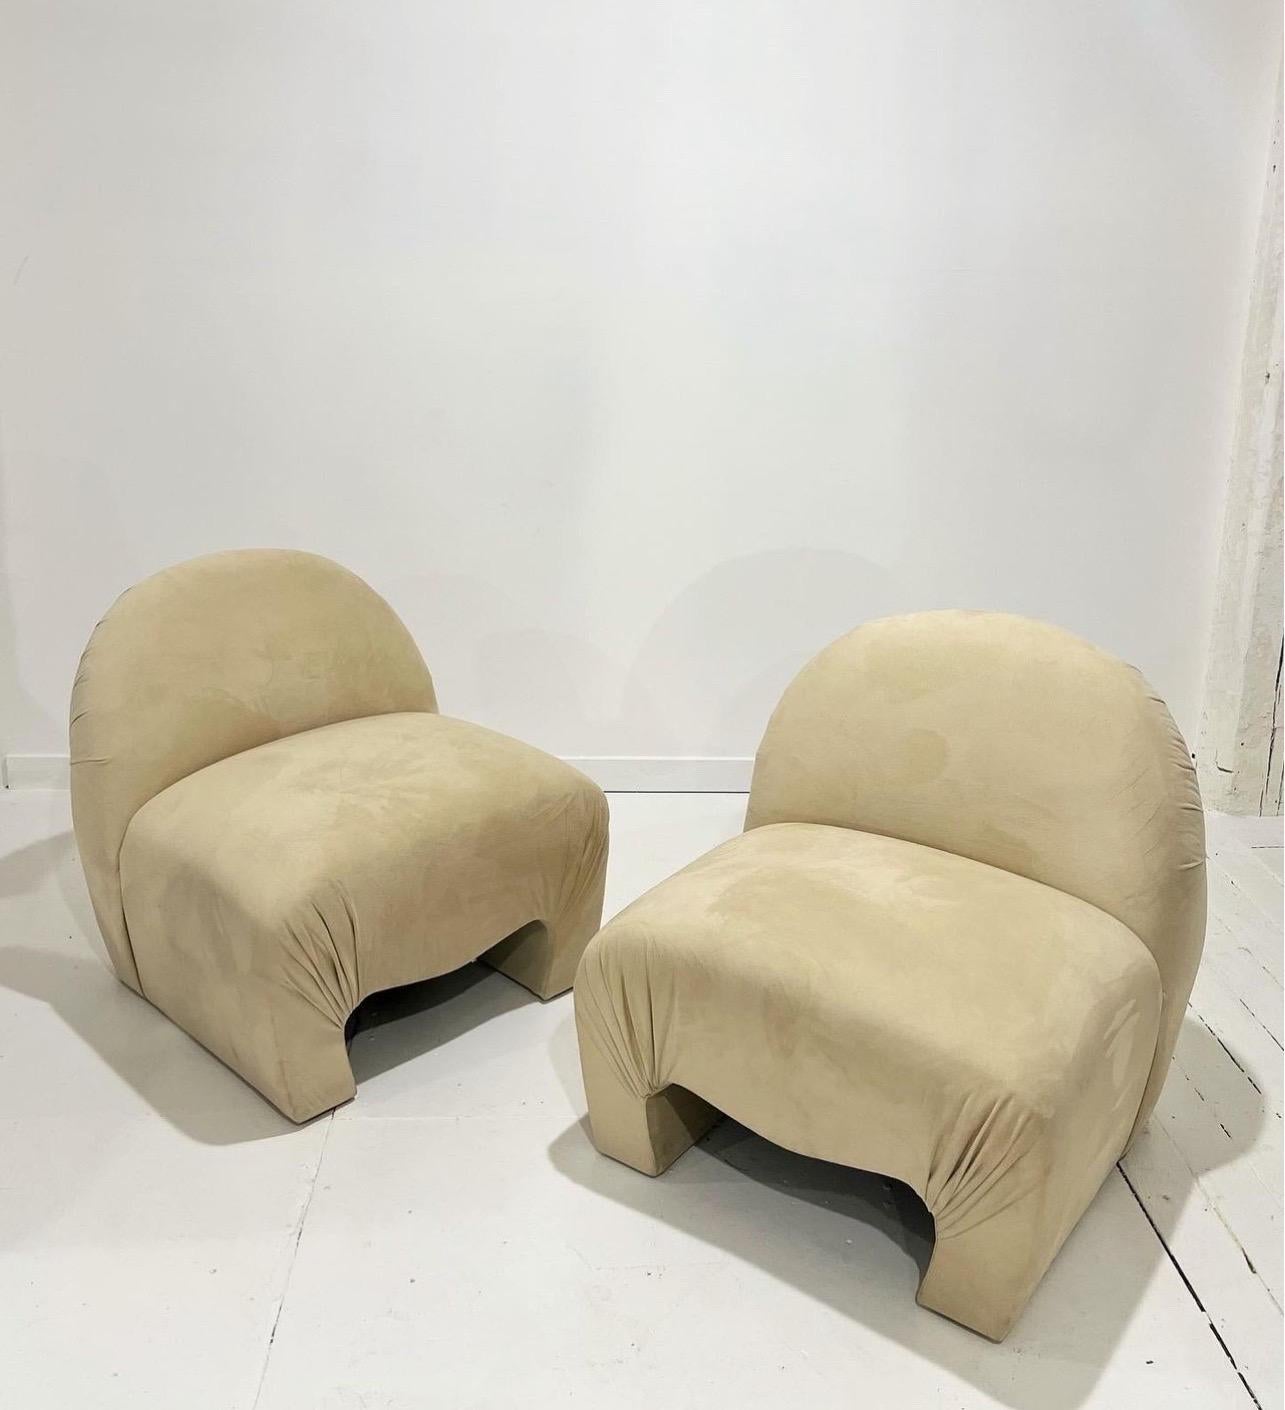 Weiman Sculptural Lounge Chairs In Excellent Condition For Sale In Brooklyn, NY